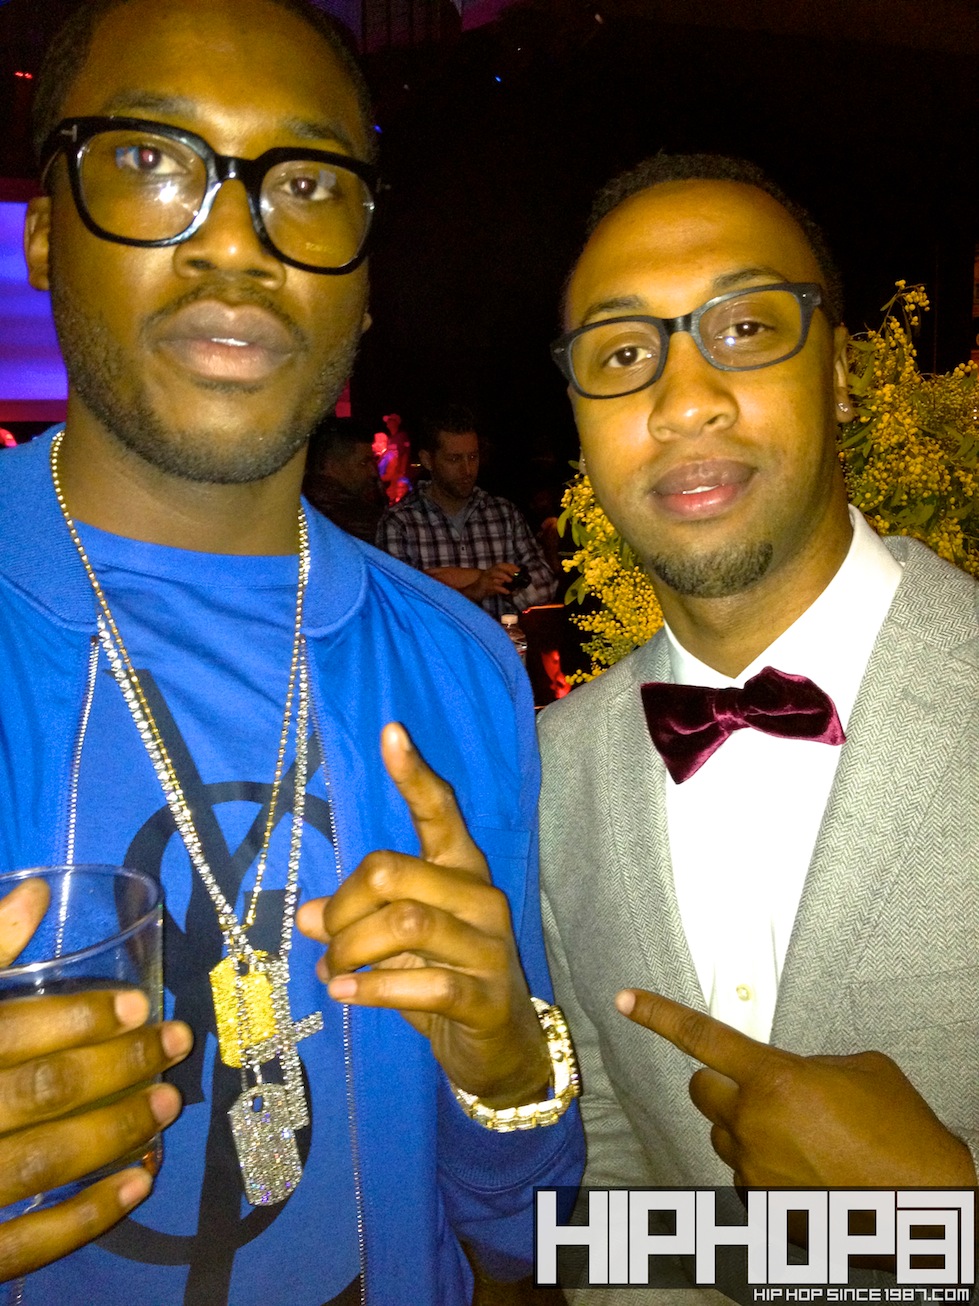 Meek-Mill-YMCMB-Grammy-Party-Pic-2 Meek Mill at YMCMB's Grammy Party Last Night In LA (@HipHopSince1987 Exclusive PHOTOS)  